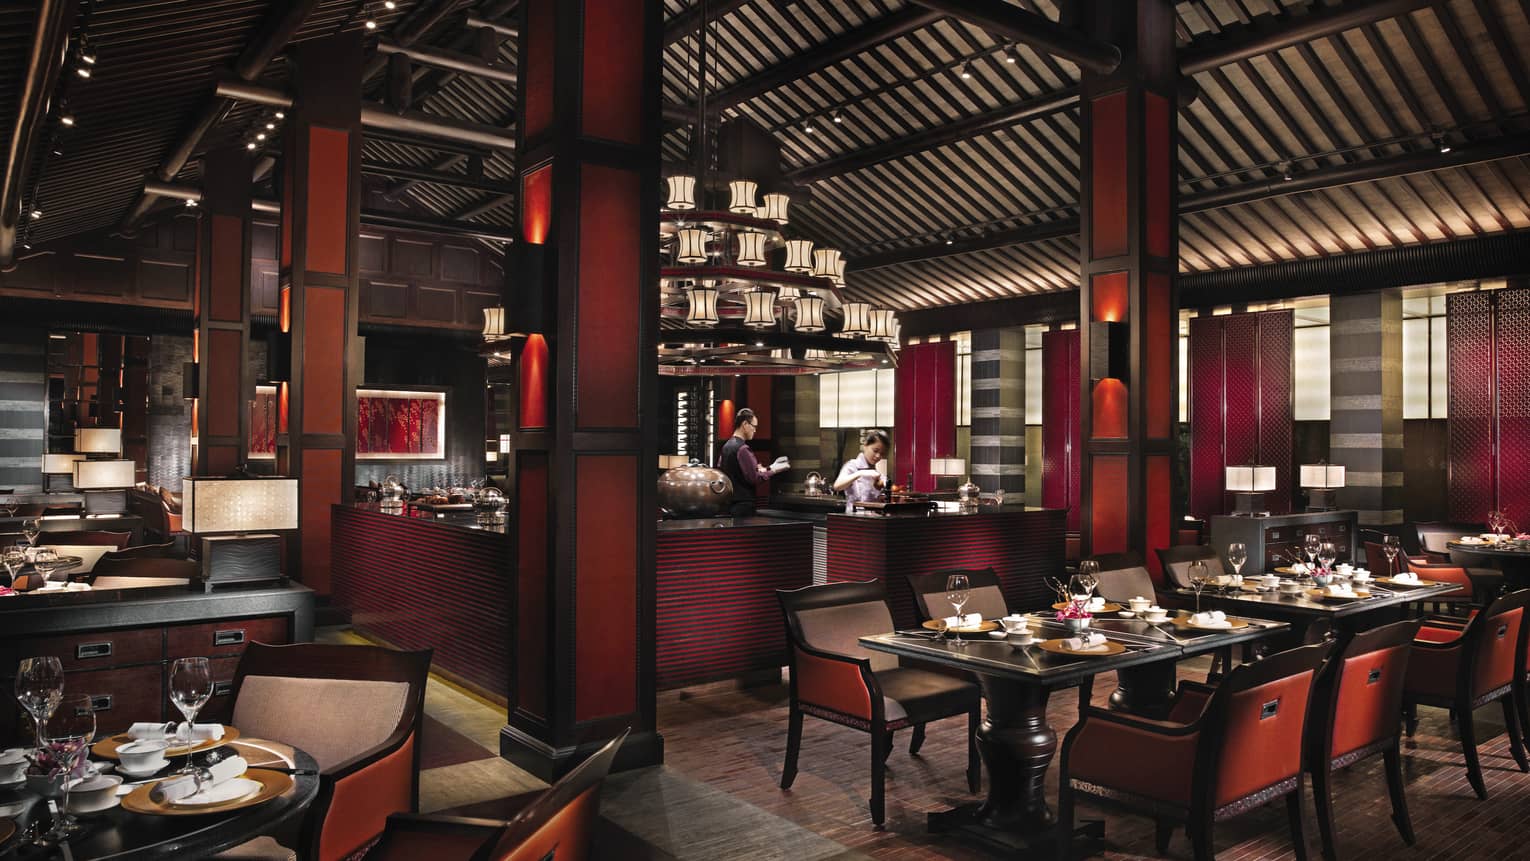 Jin Sha dining room with dark red-and-black decor